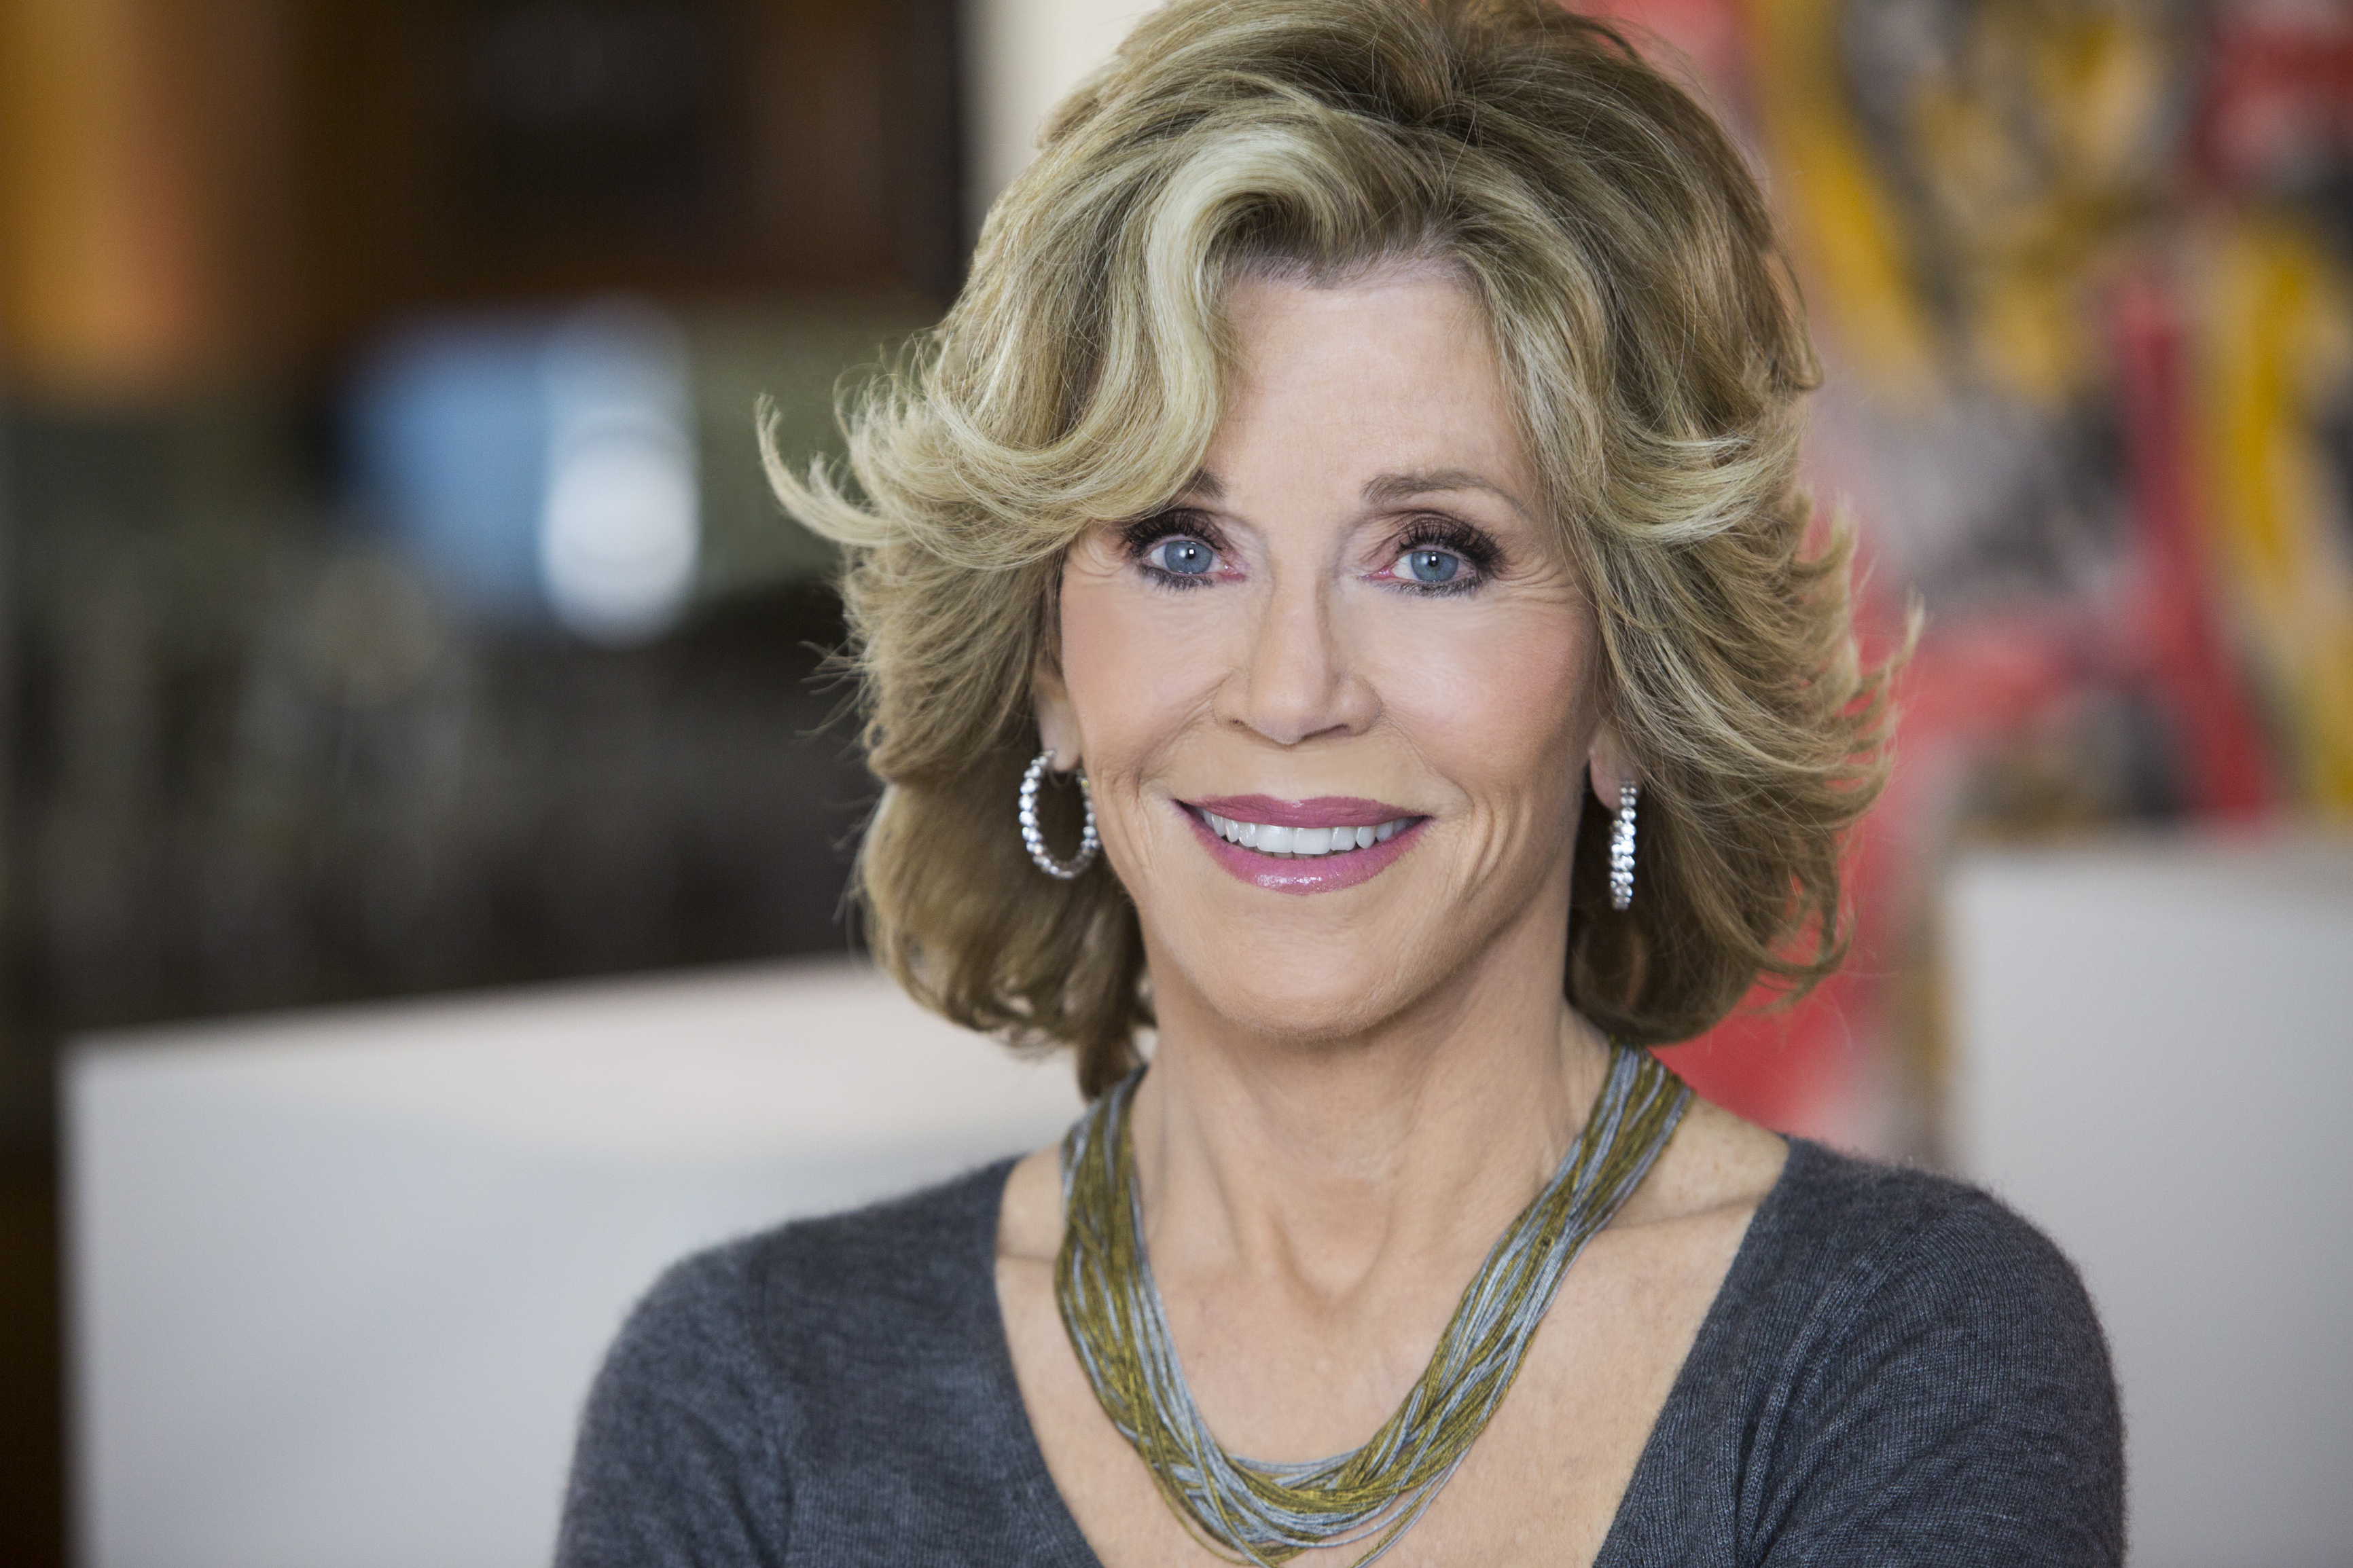 Jane Fonda on the set of PBS documentary series, Makers: Women Who Make America, at her Beverly Hills.
Photo by Nancy Pastor